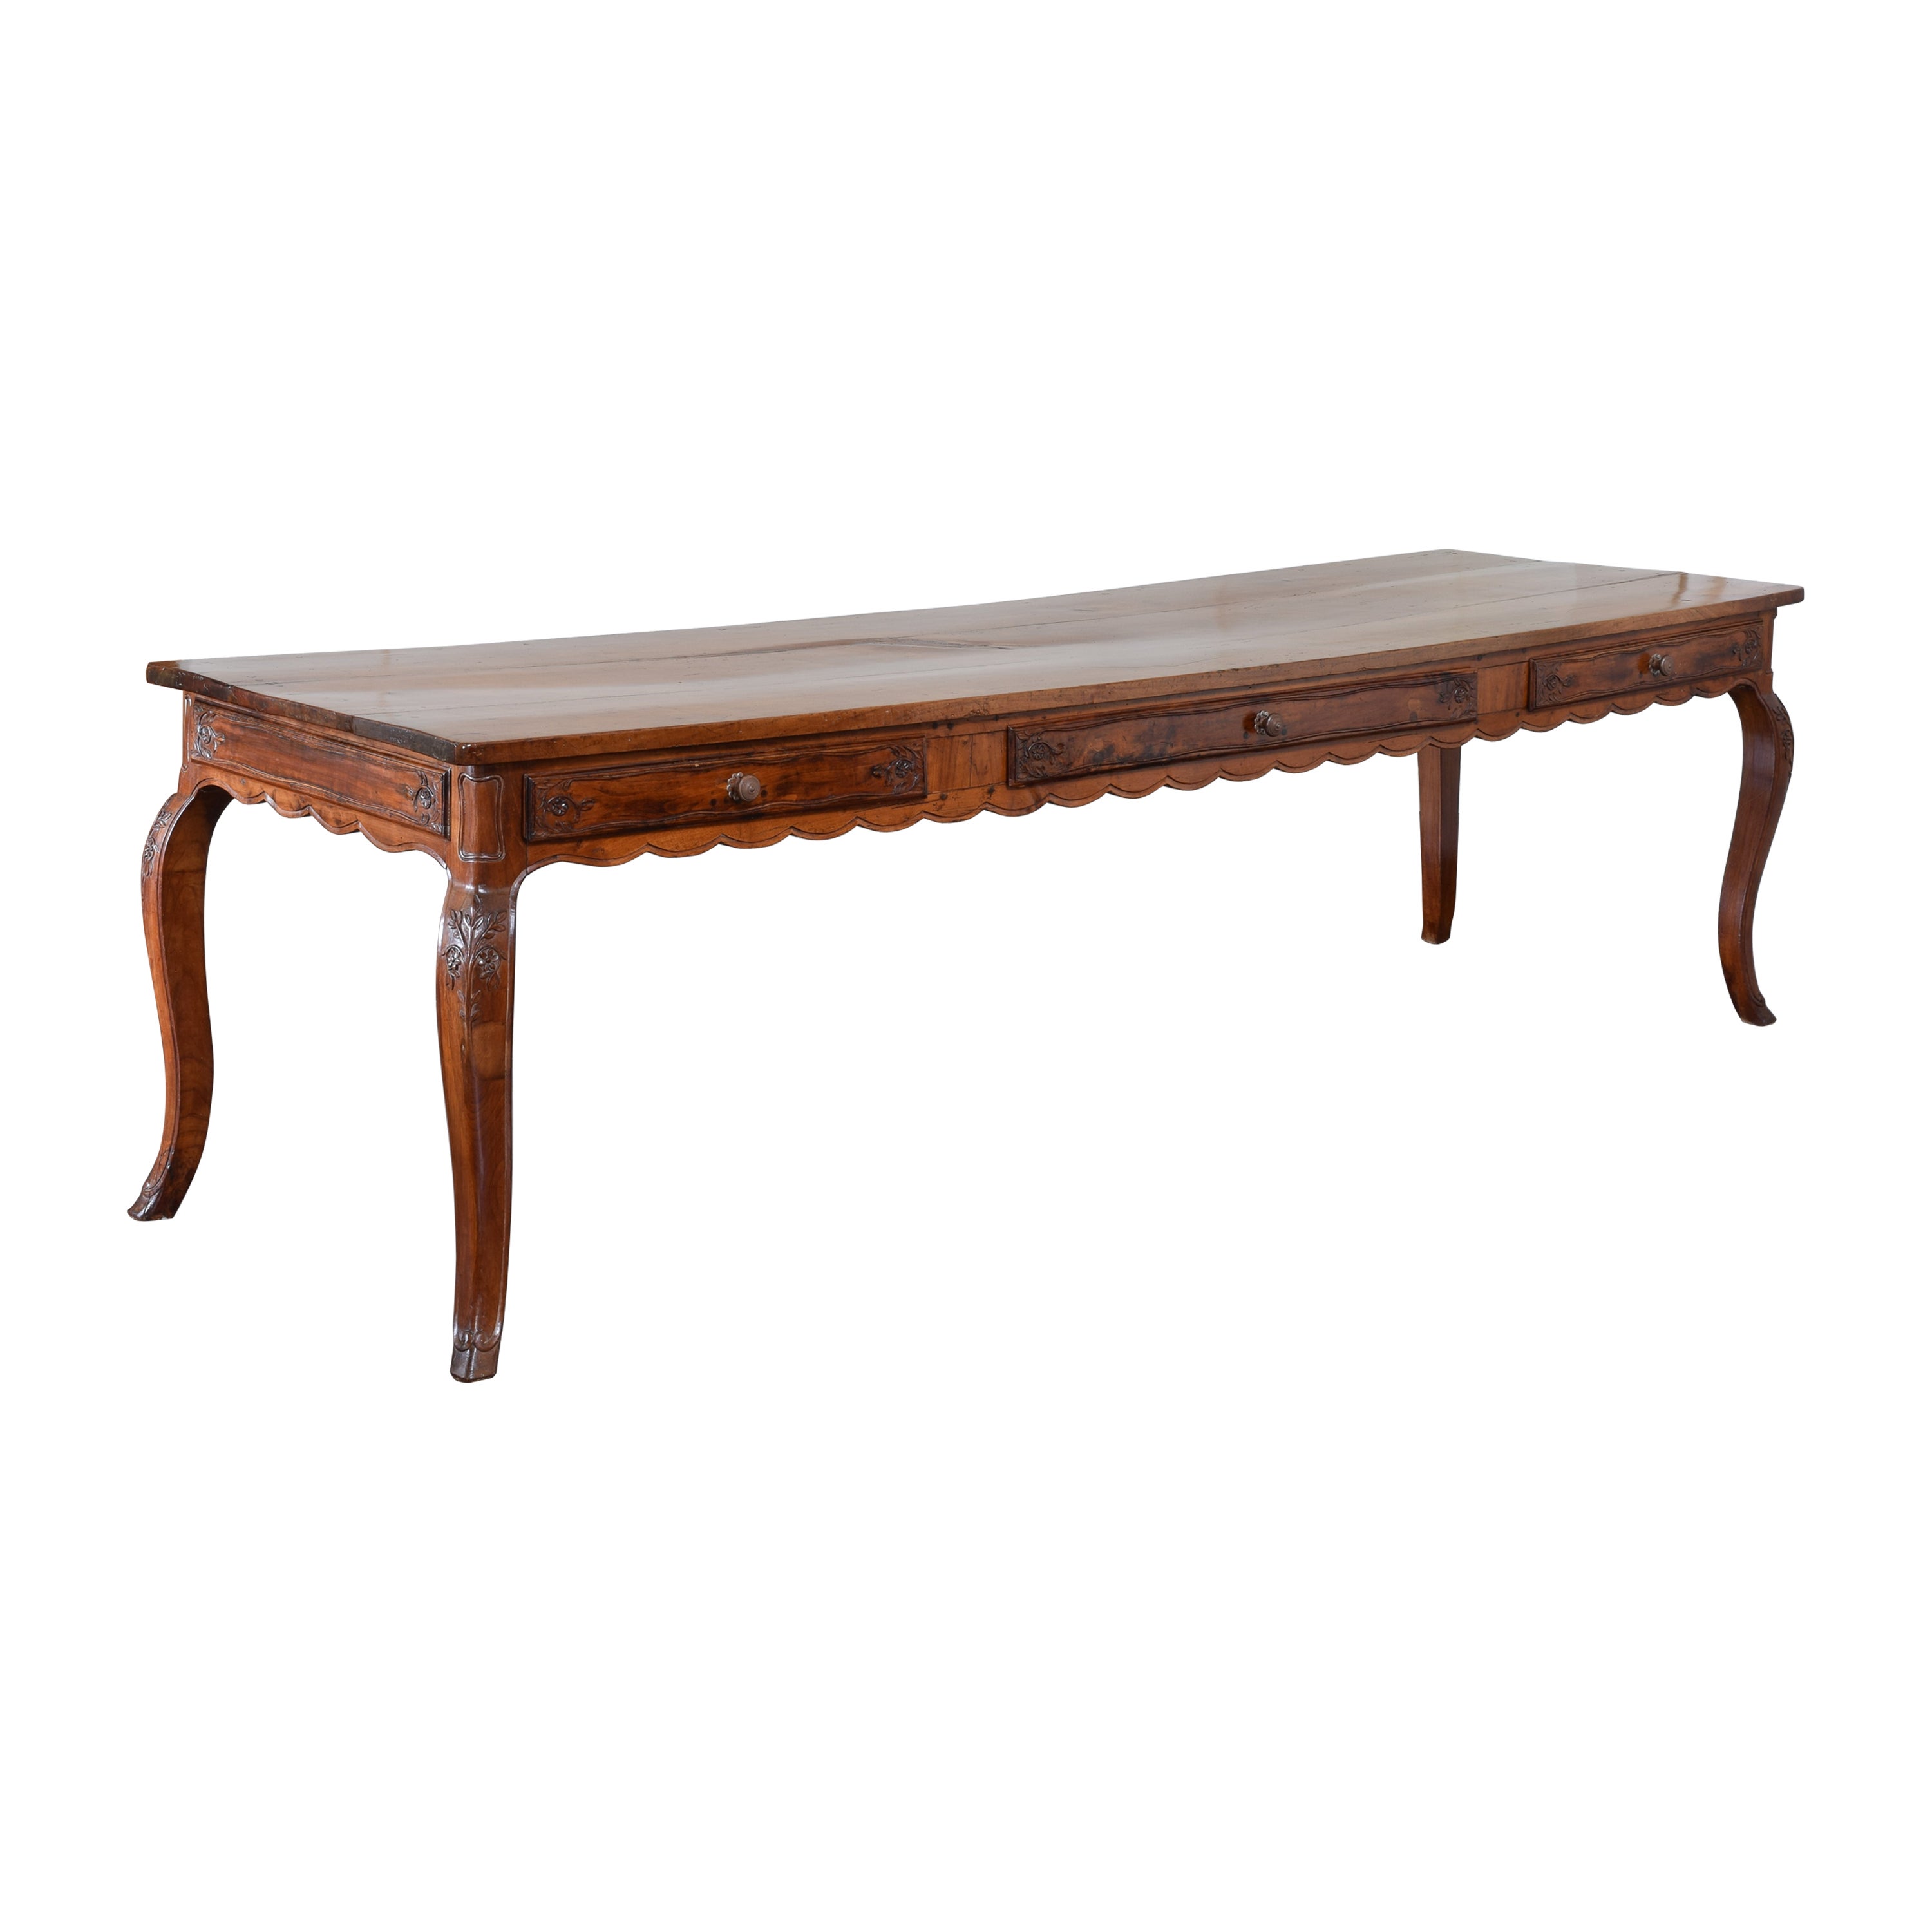 French, Louis XV Period, Carved Walnut 3-Drawer Kitchen/Center Table, mid 18thc